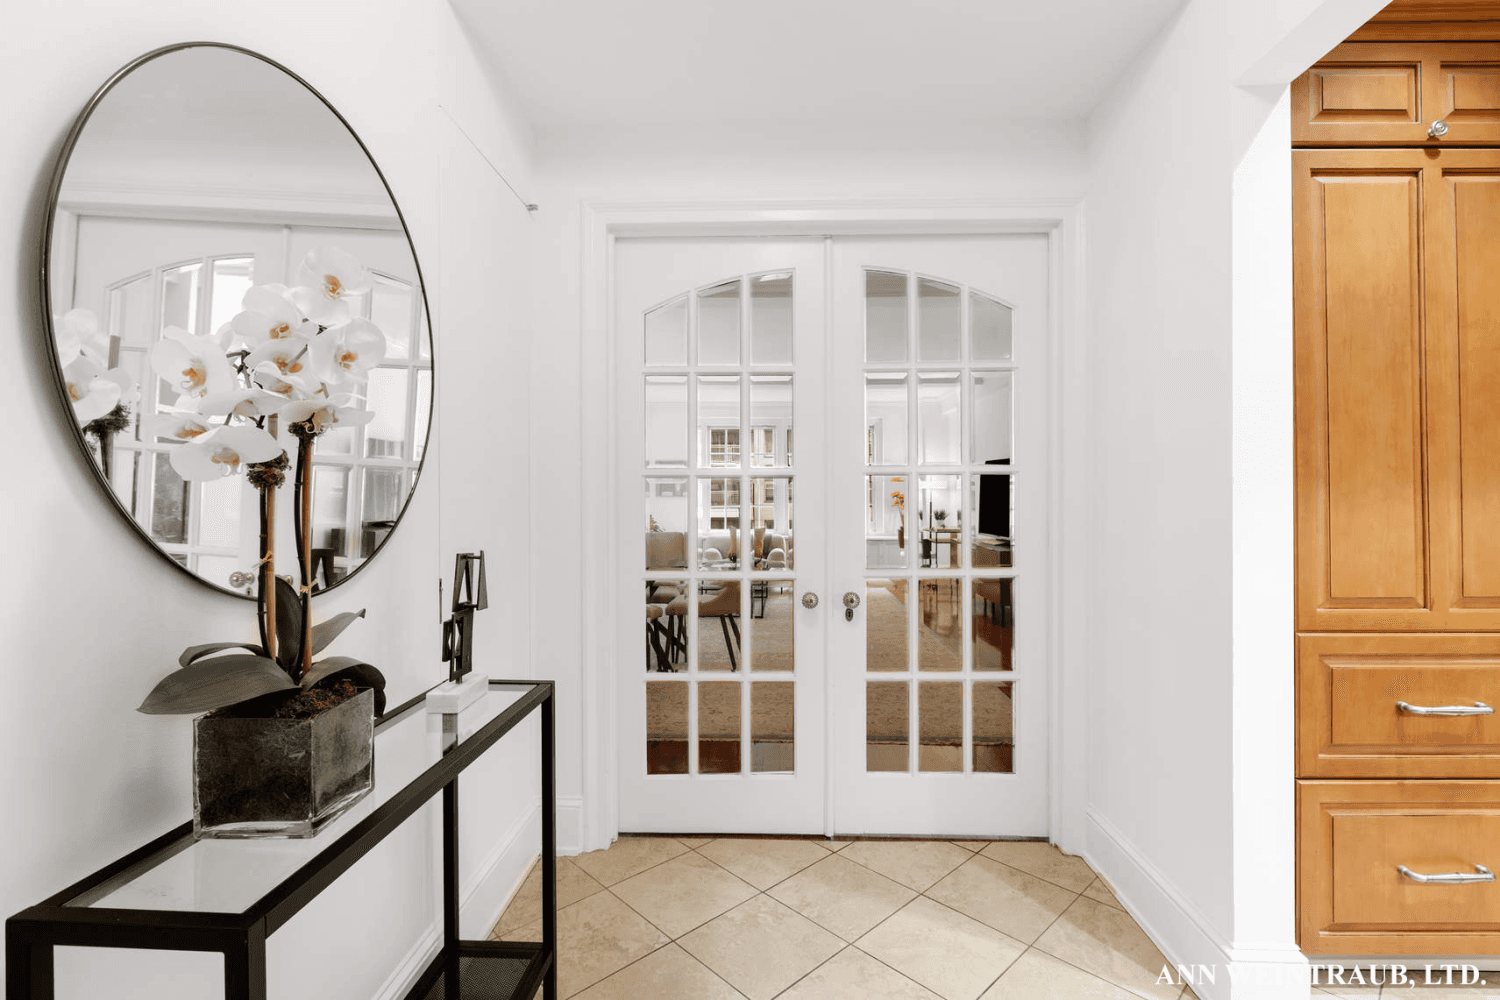 Open the custom designed, glass paneled, double French doors and you will enter the largest 1 bedroom line of apartments housed within the iconic One Fifth Avenue building that exudes ...